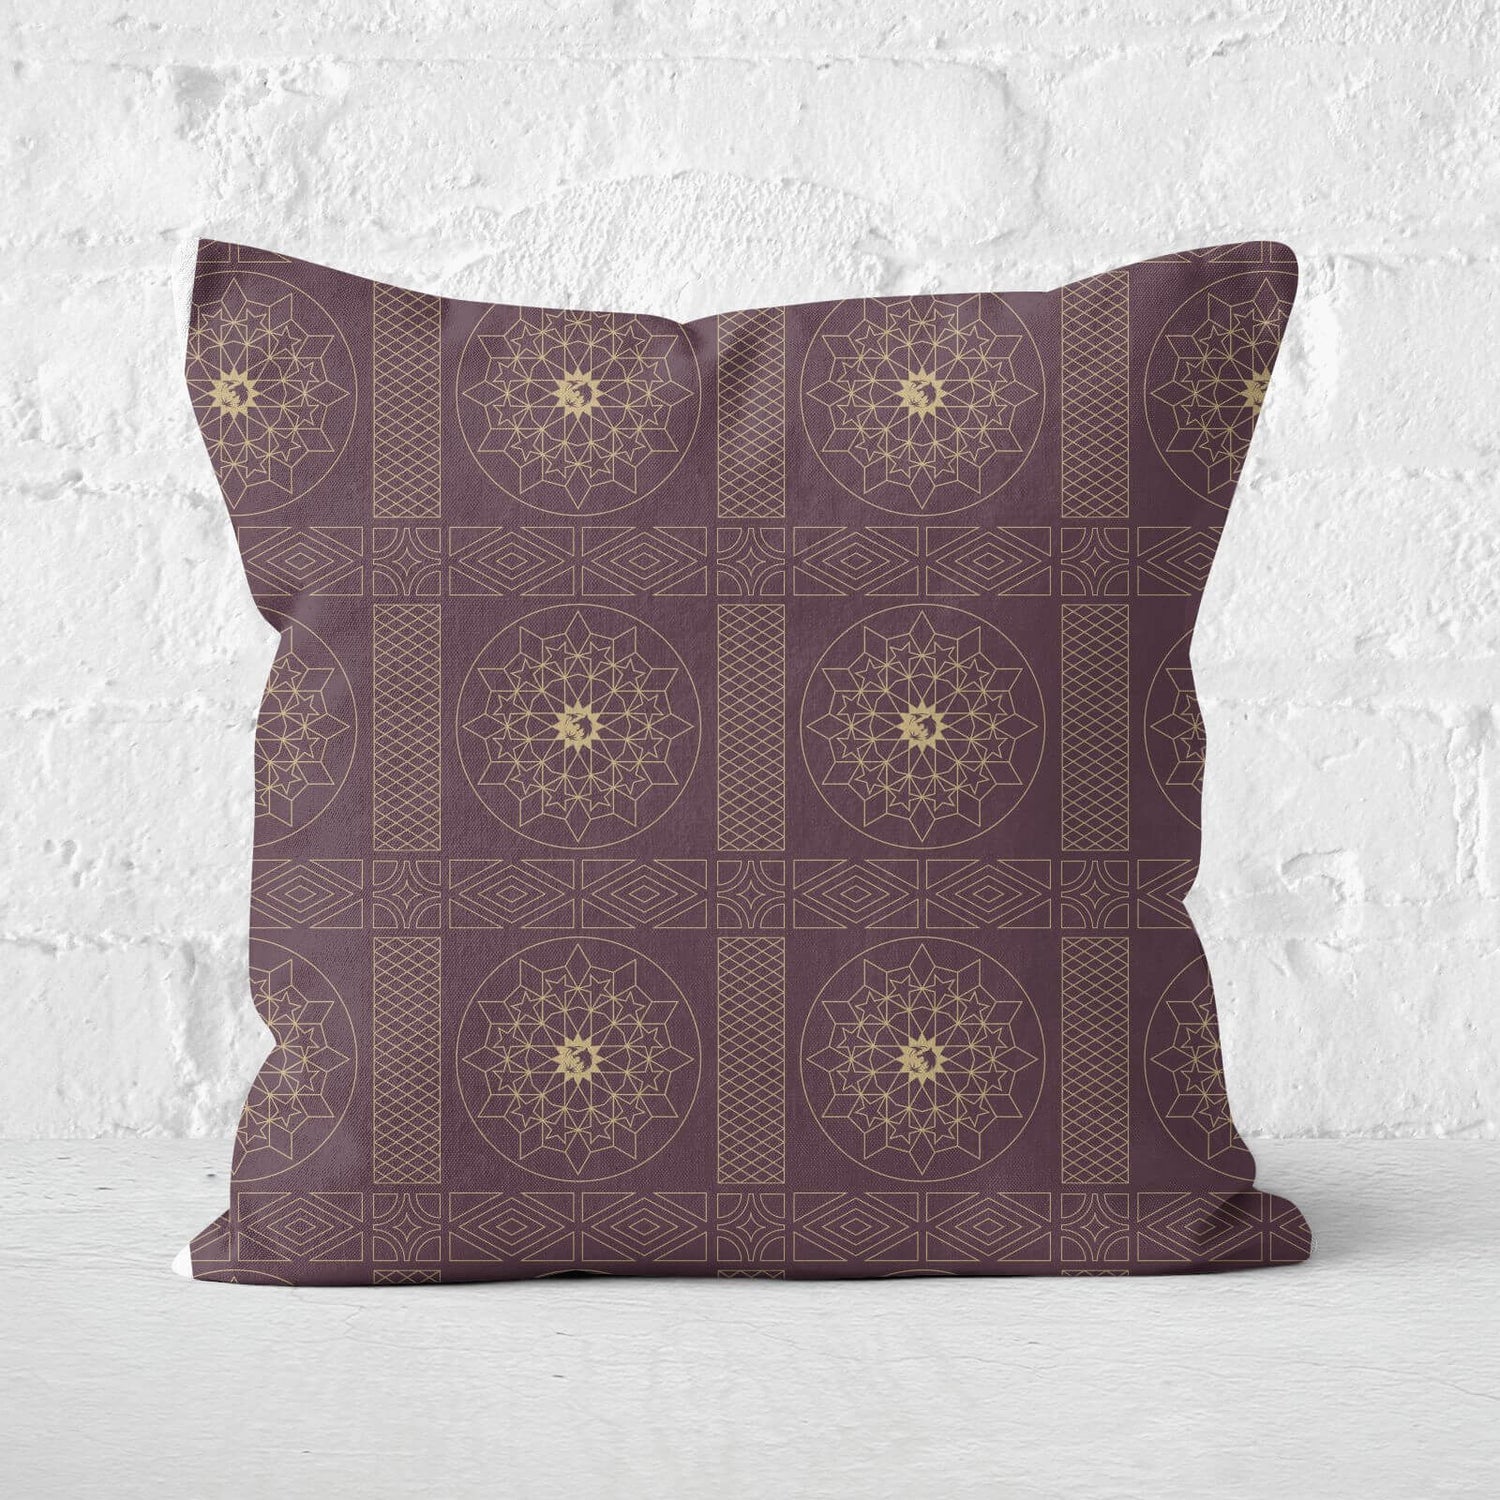 The Witcher The Mage Square Cushion